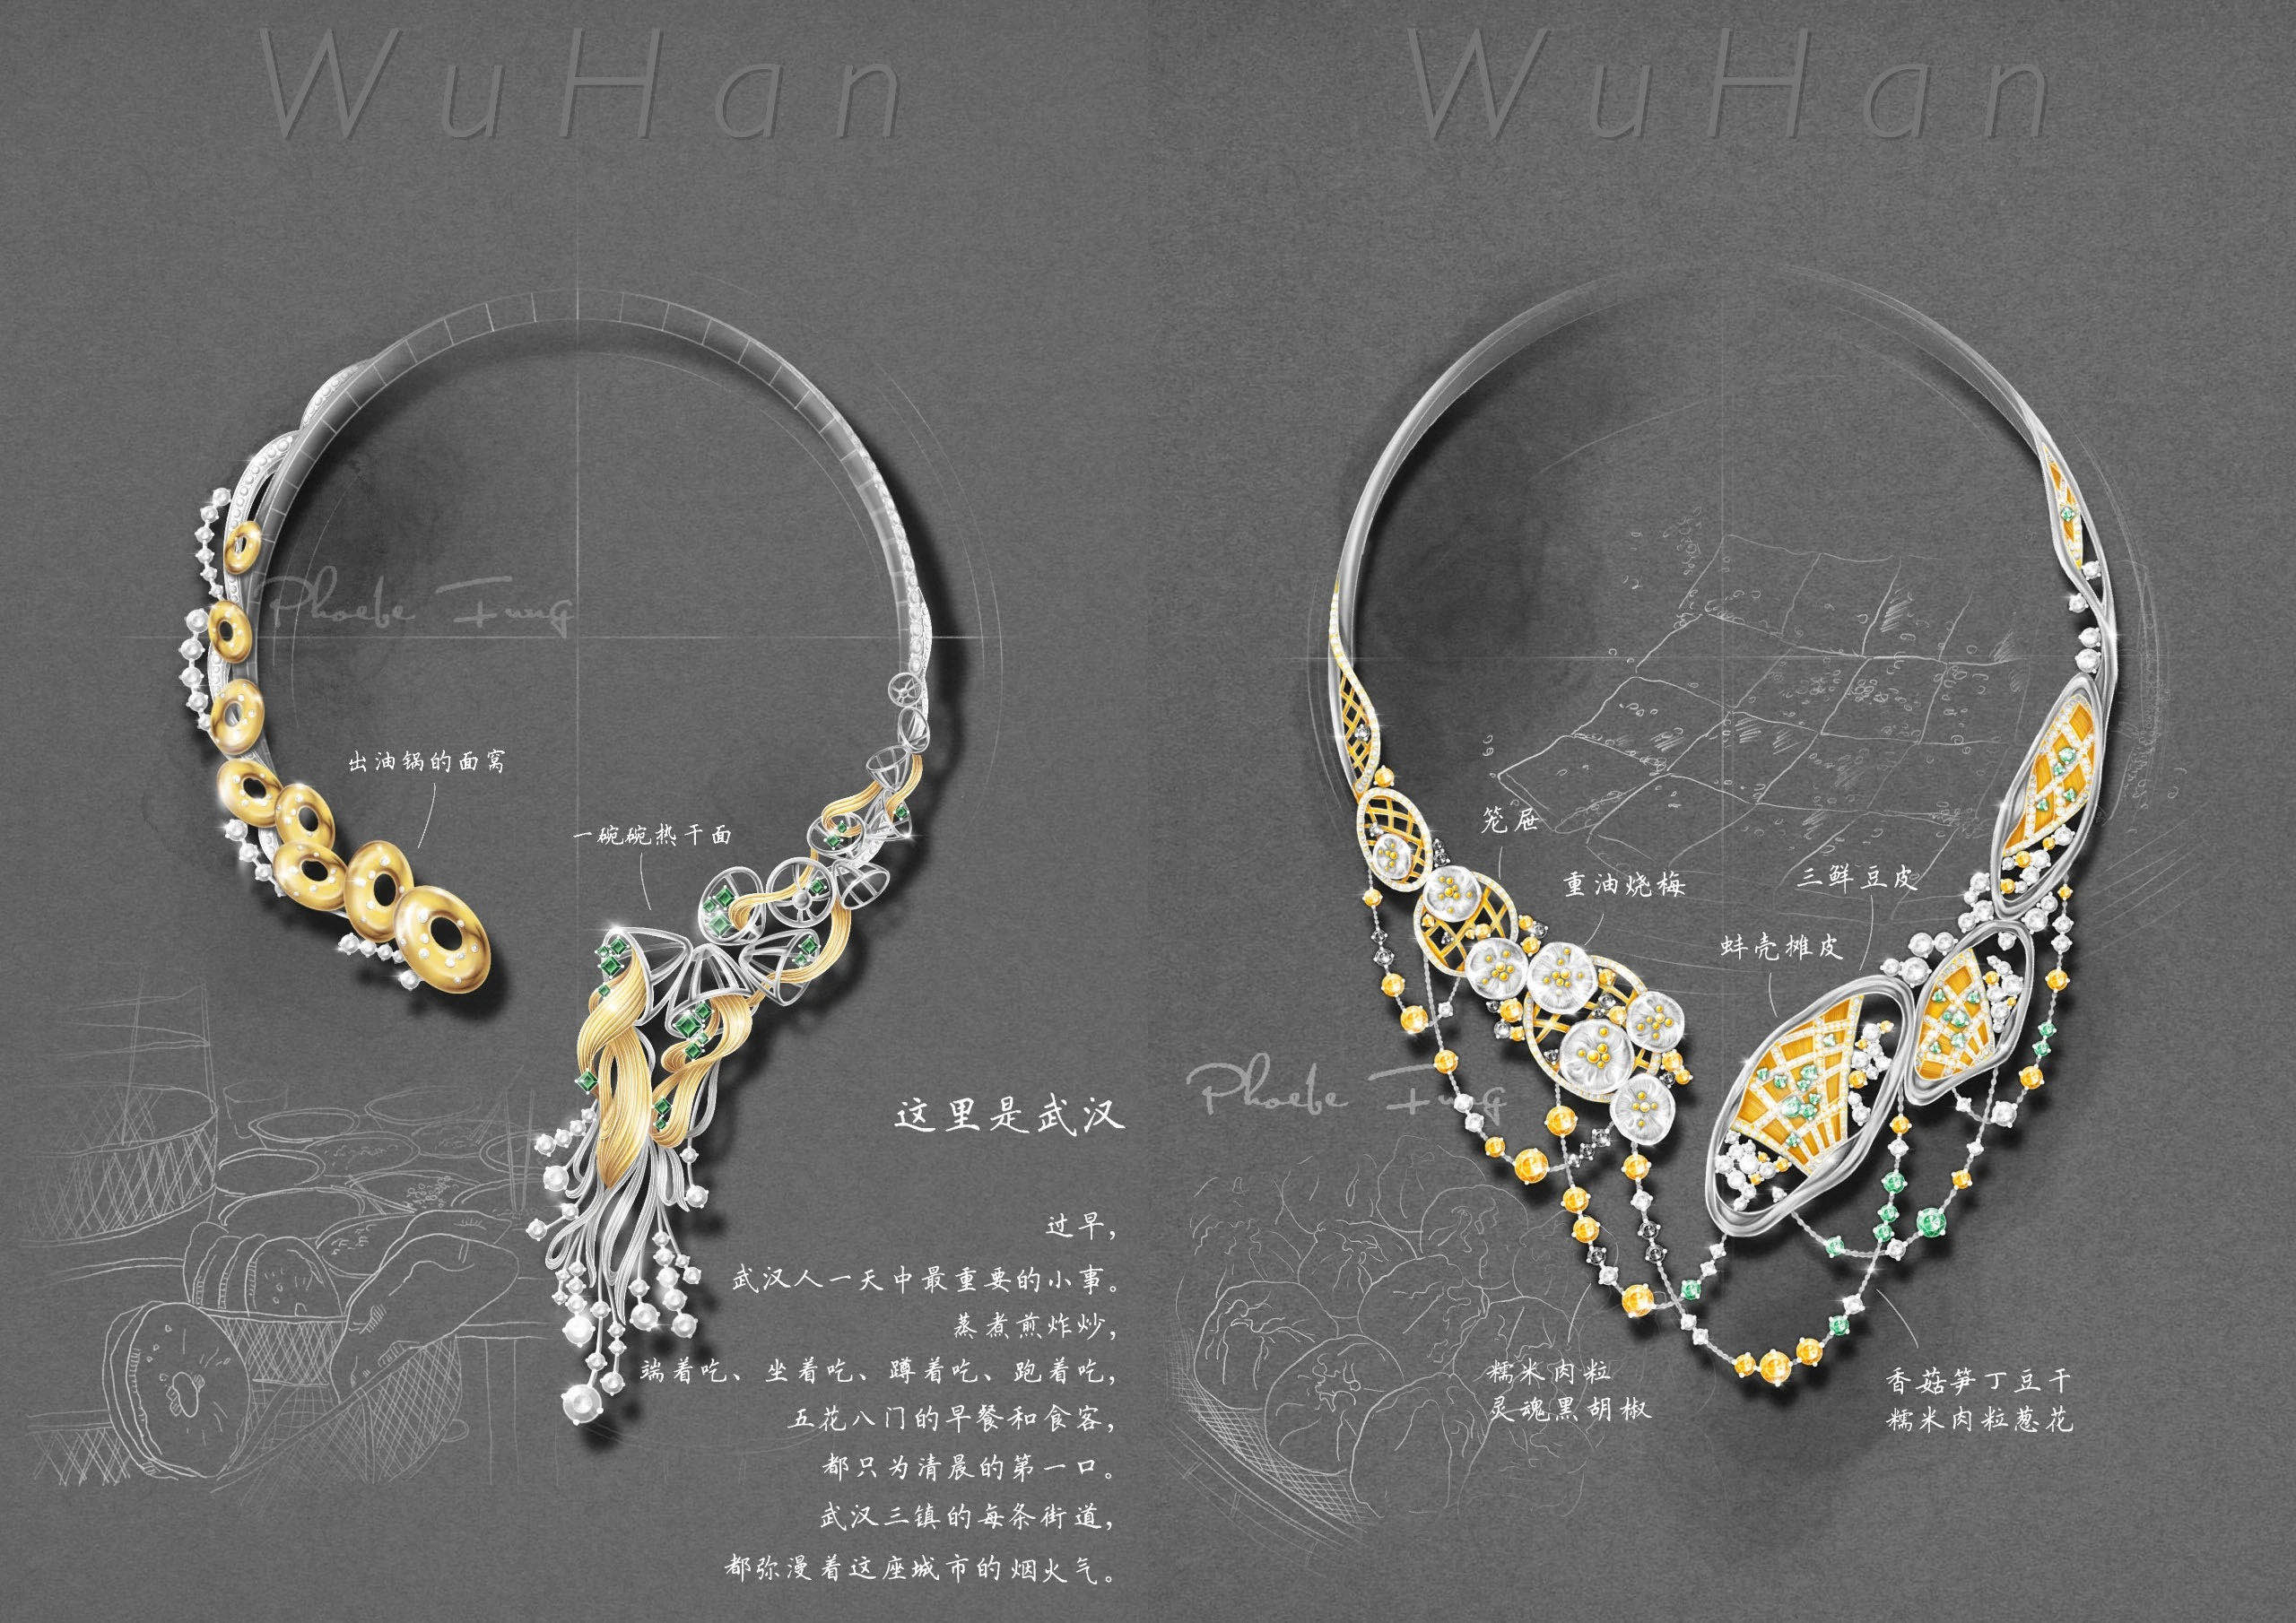 Jewelry designer transforms Wuhan's cityscape into stunning creations ...